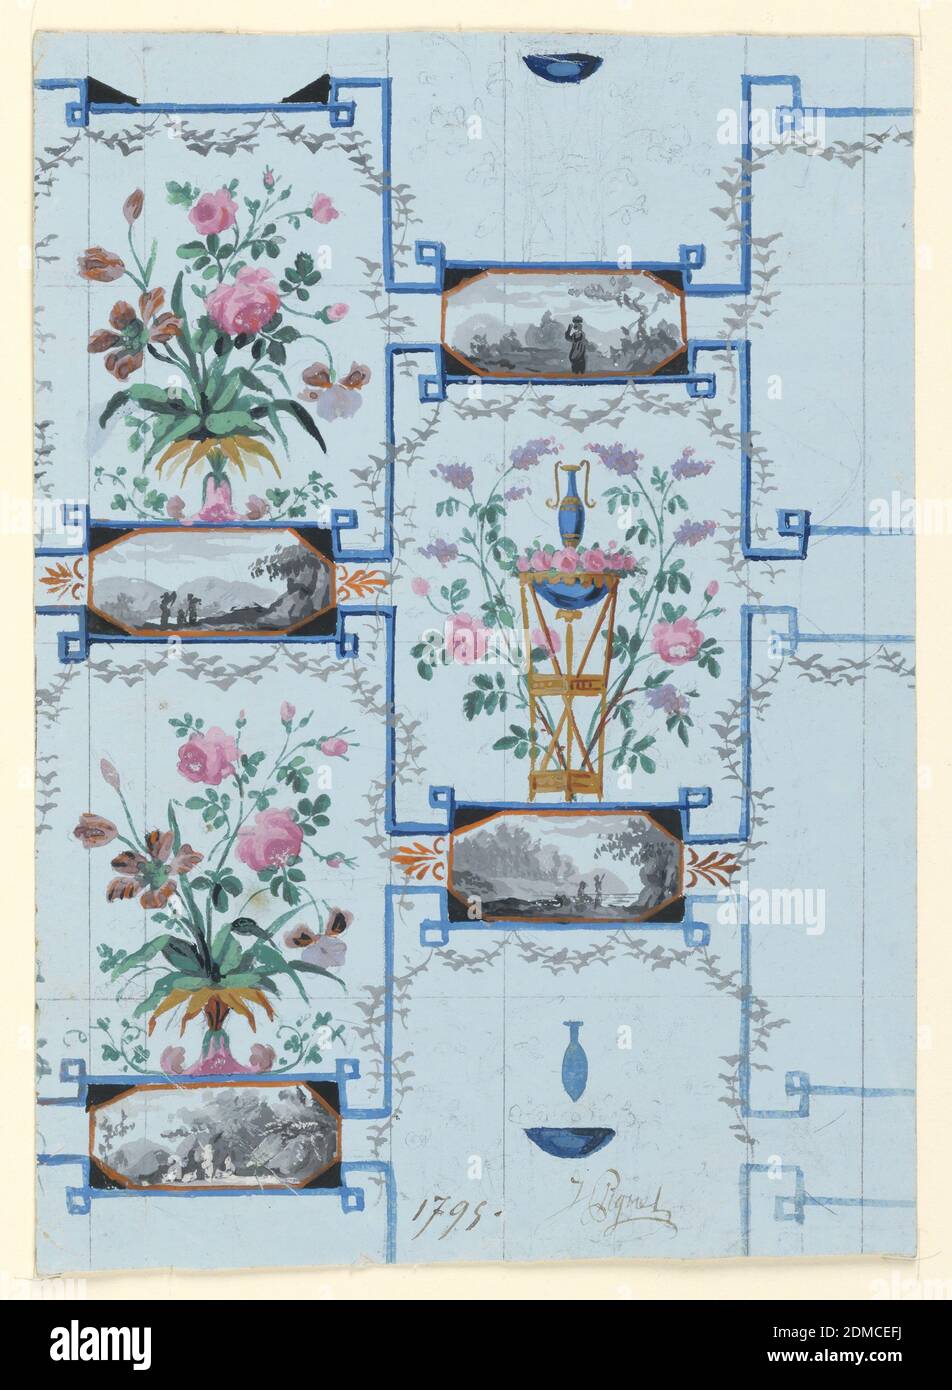 Wallpaper Design, Pignet et Cie, Brush and tempera, graphite on laid paper, Design for wall-paper of the Directoire period, combining elements of panel wall-papers and simple repeating wall-papers. Landscape vignettes in grisaille are combined with large floral arabesques., 1795, wallpaper designs, Drawing Stock Photo